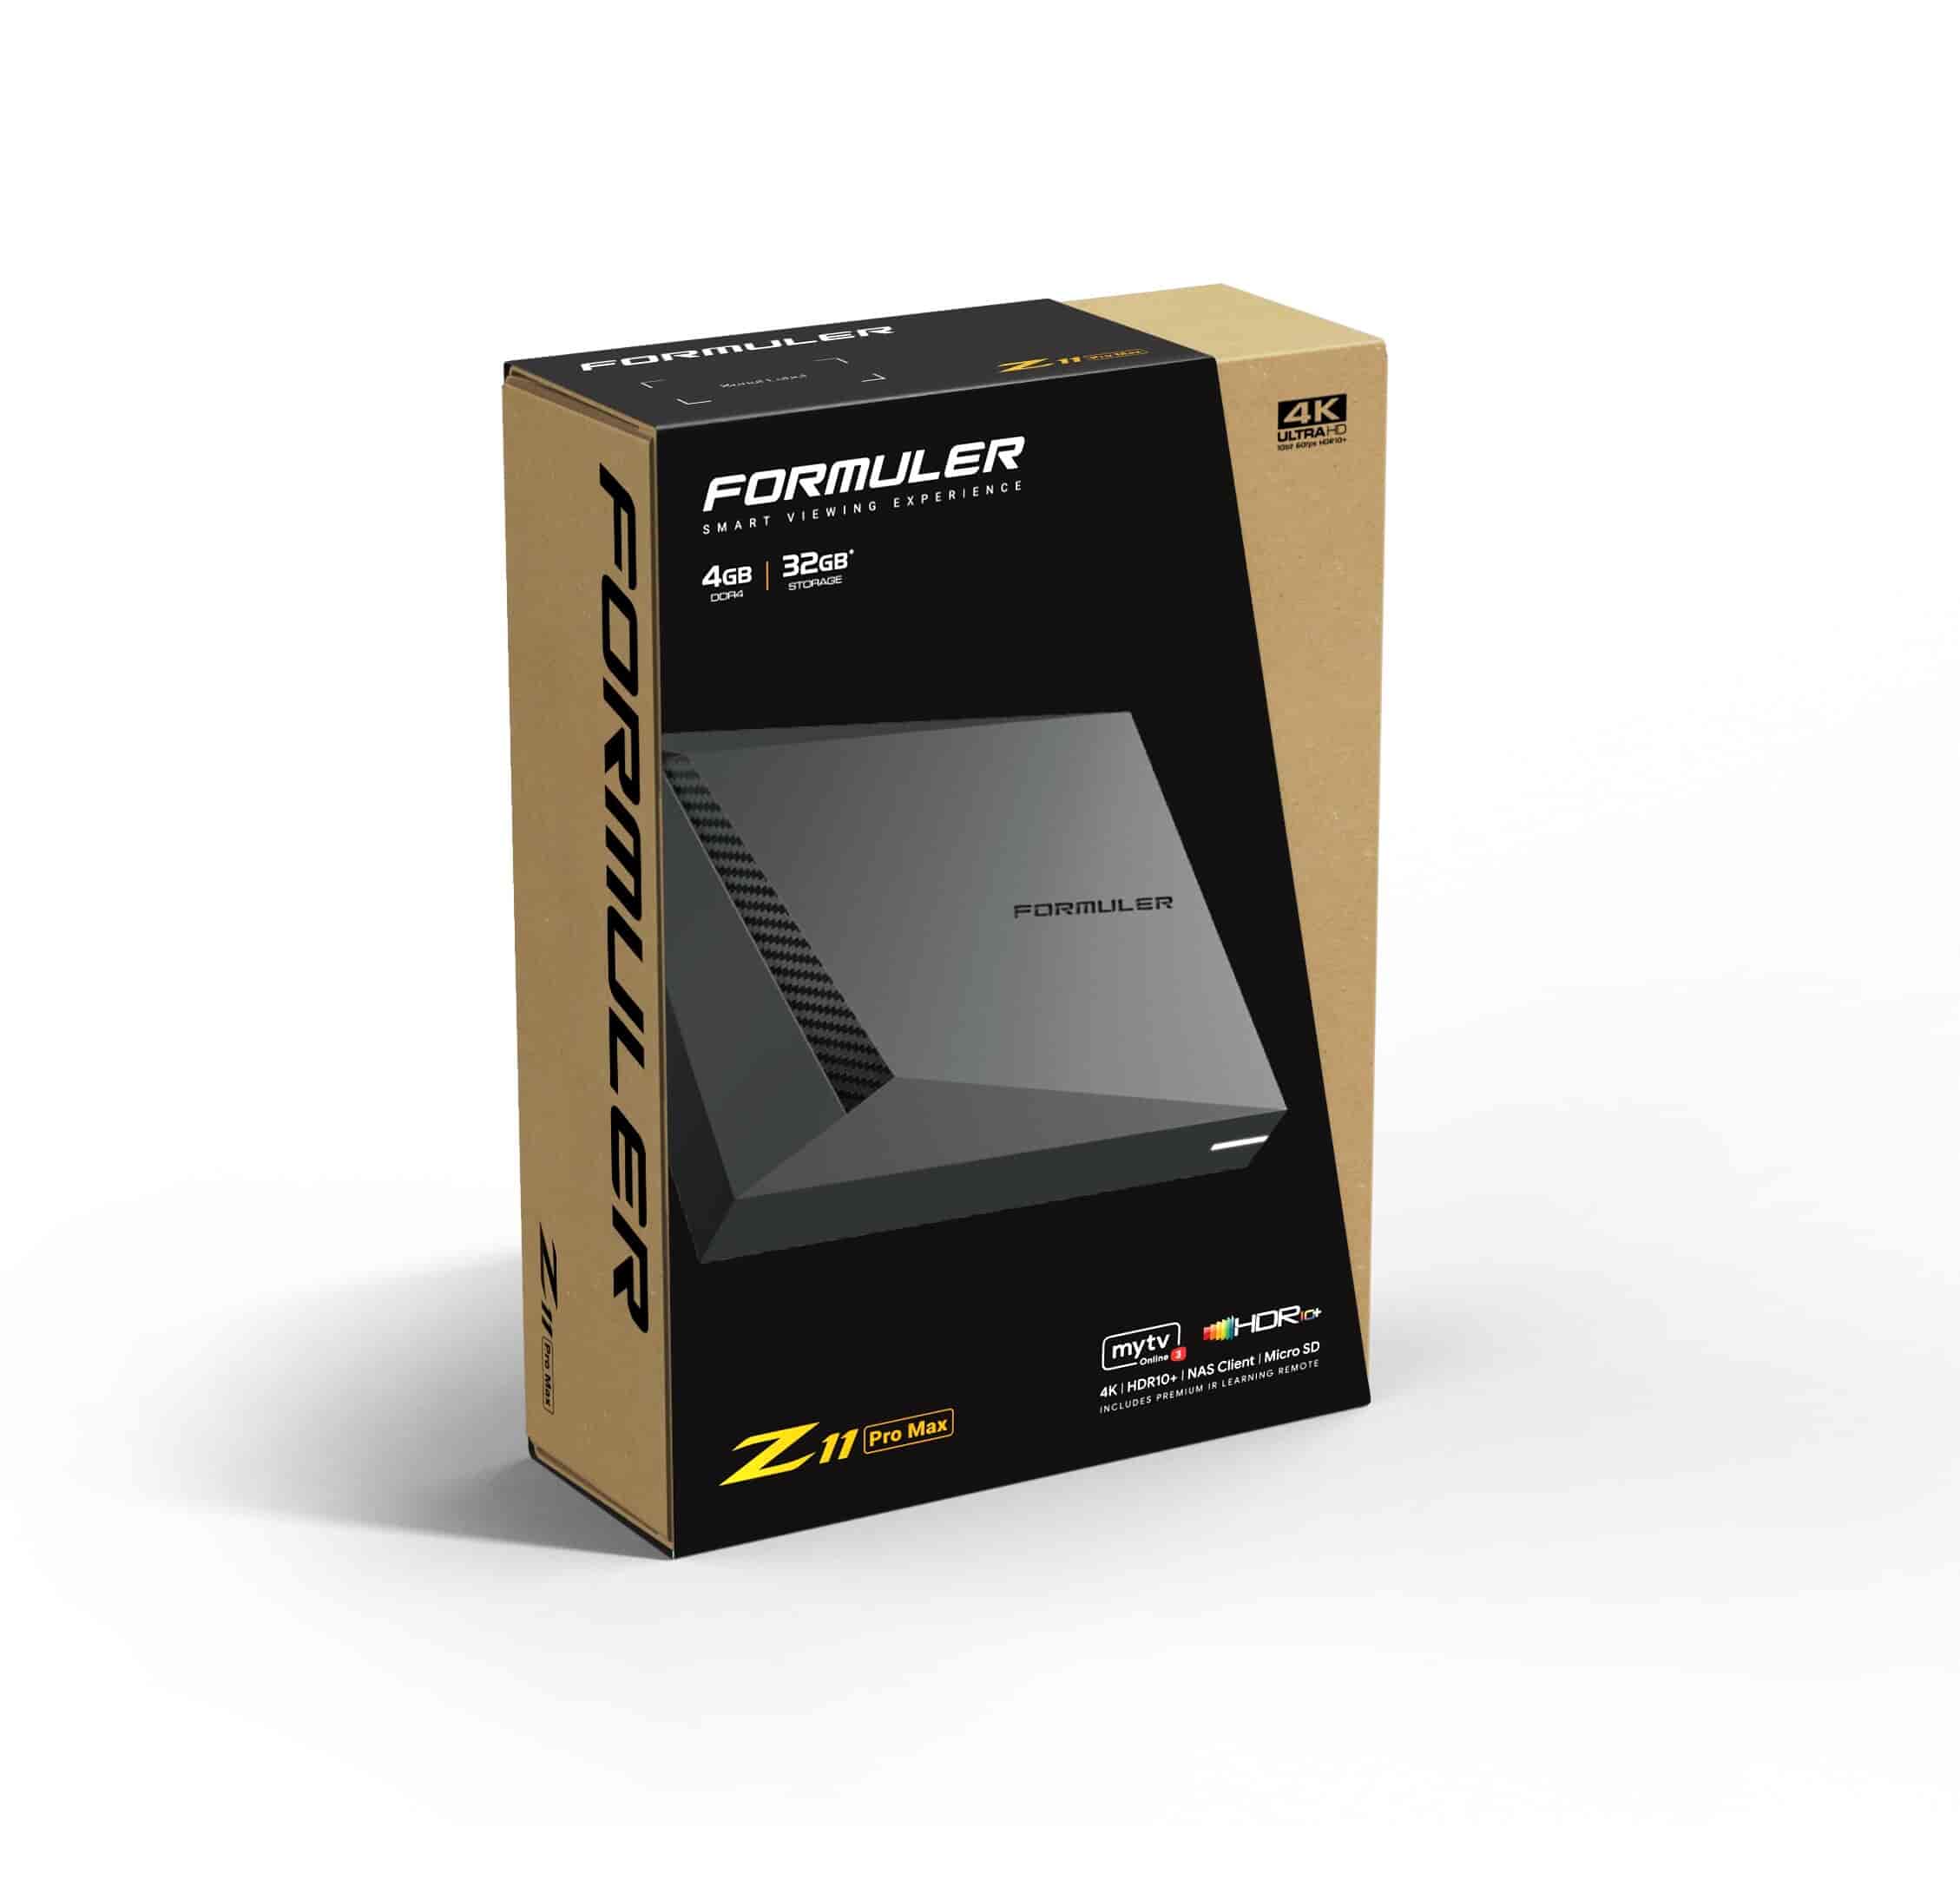 Formular Z11 PROMAX 4K Android 11 OTT Media Streamer 4GB RAM 32GB Flash, WiFiThe fastest Formuler OTT IPTV box ever - 4GB RAM and 32GB STORAGE - Formuler Z11 Pro Max. The all-new Formuler Z11 Pro Max media streamer makes it easy to experience high-quality content on the big screen. The 4 GB RAM enables the most demanding applications to run smoothly. Embedded Widevine Level 1 and 3 DRM provides access to premium ultra high definition content. Android 11 with MYTV online 3.Formuler